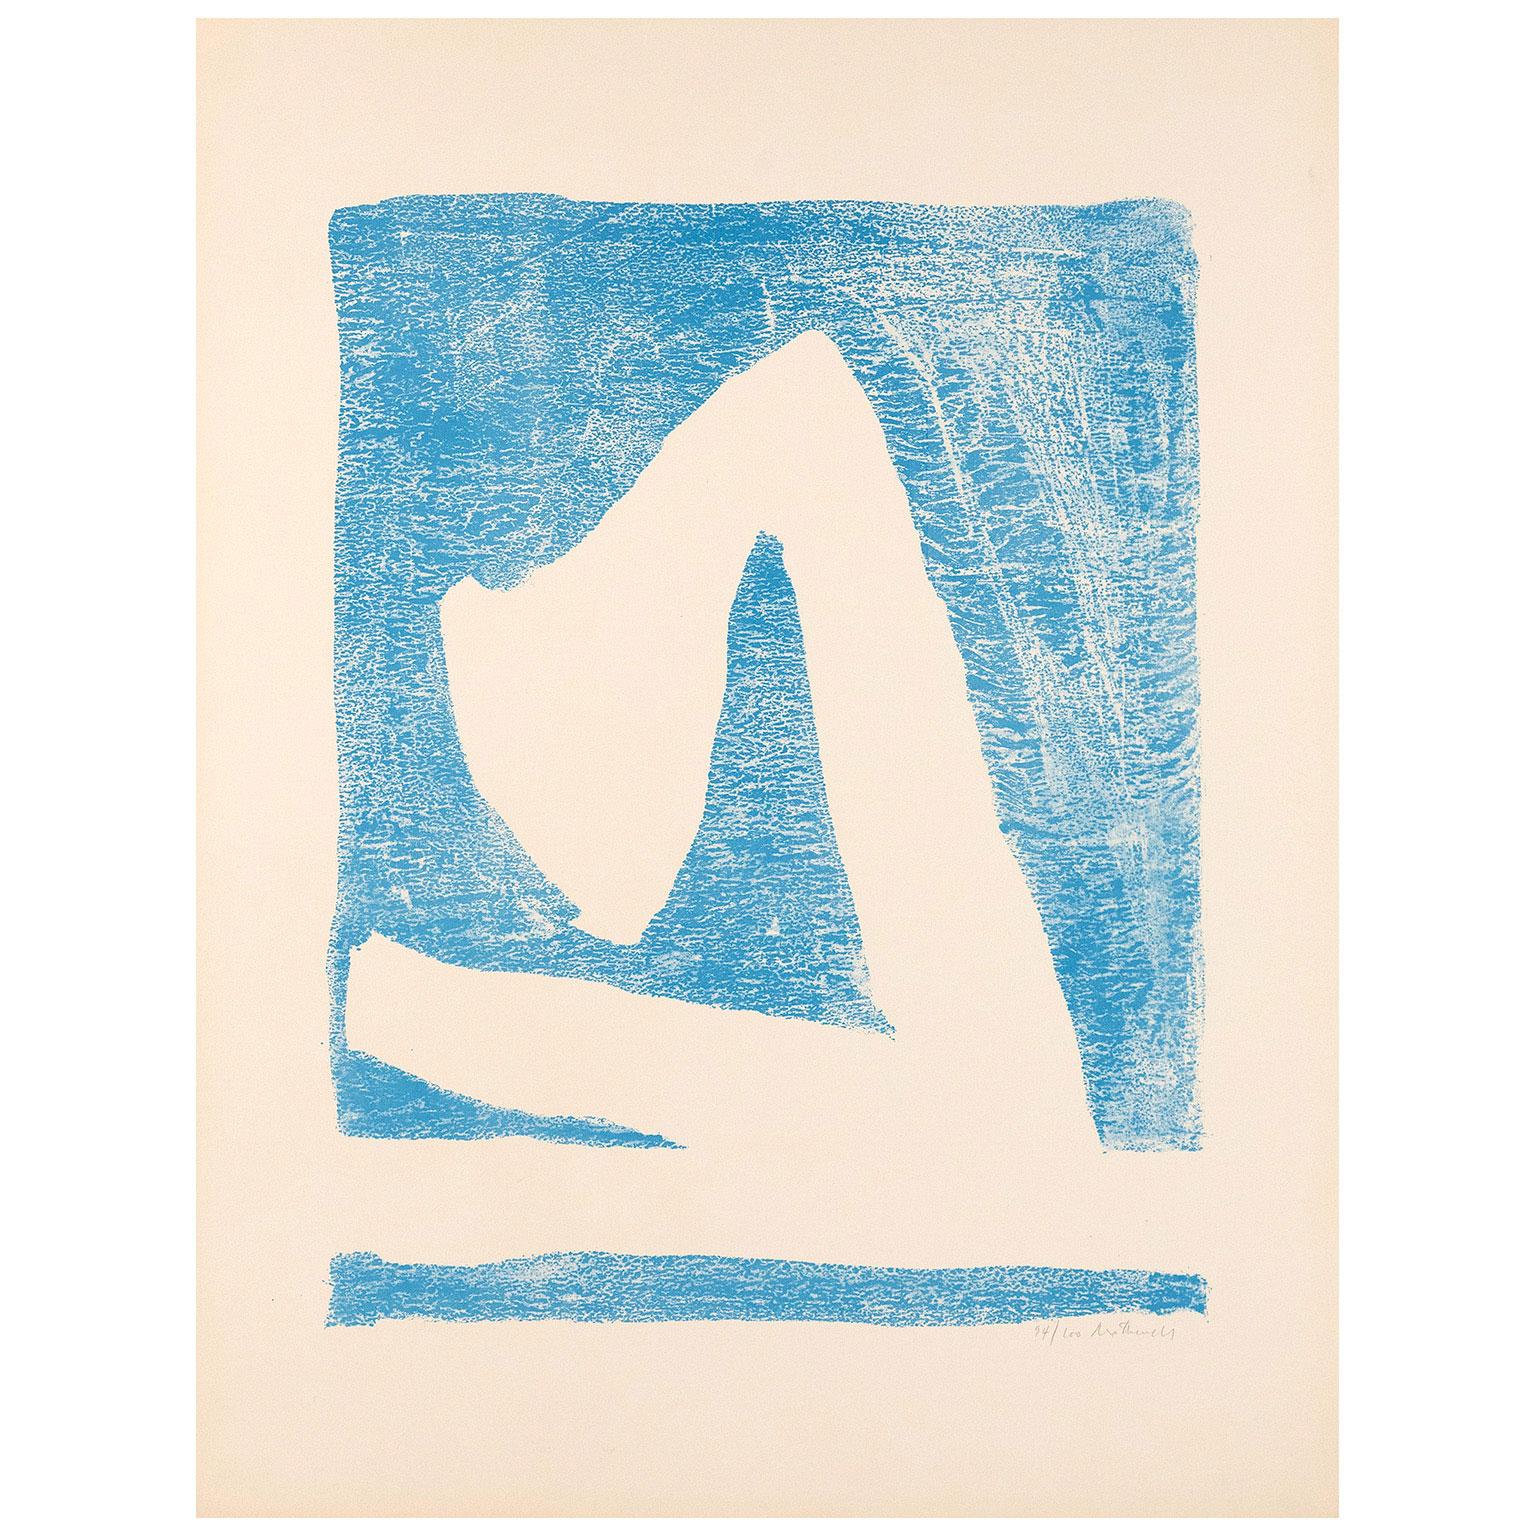 Robert Motherwell Abstract Painting - Summertime in Italy (Blue)